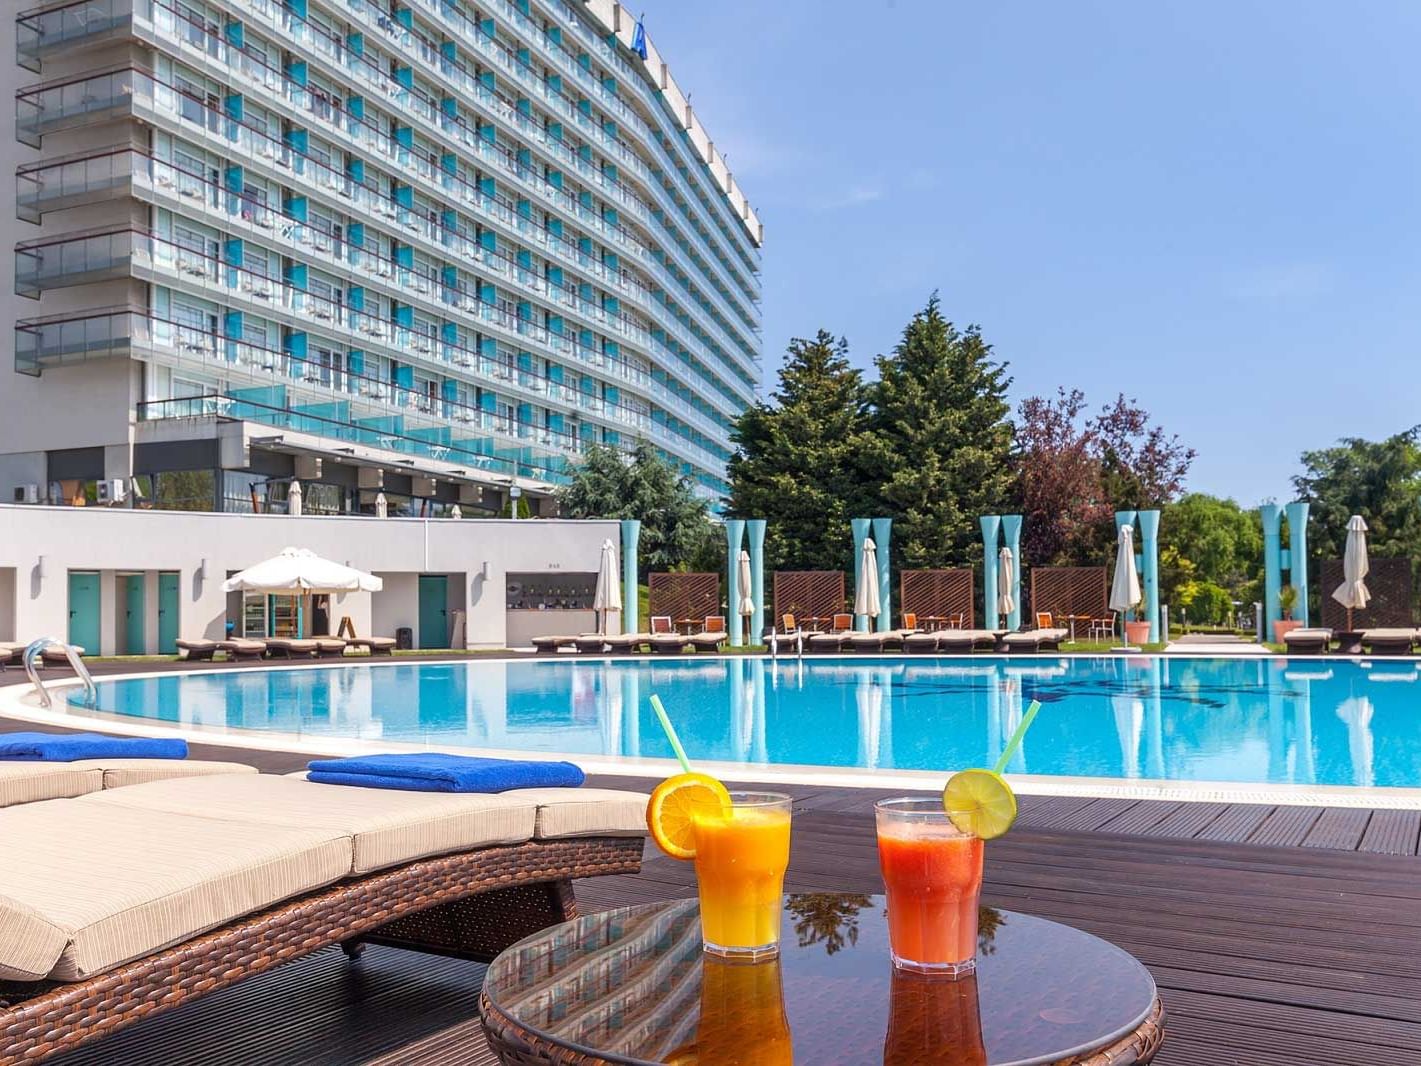 Drinks from Pool Bar by outdoor pool at Ana Hotels Europa